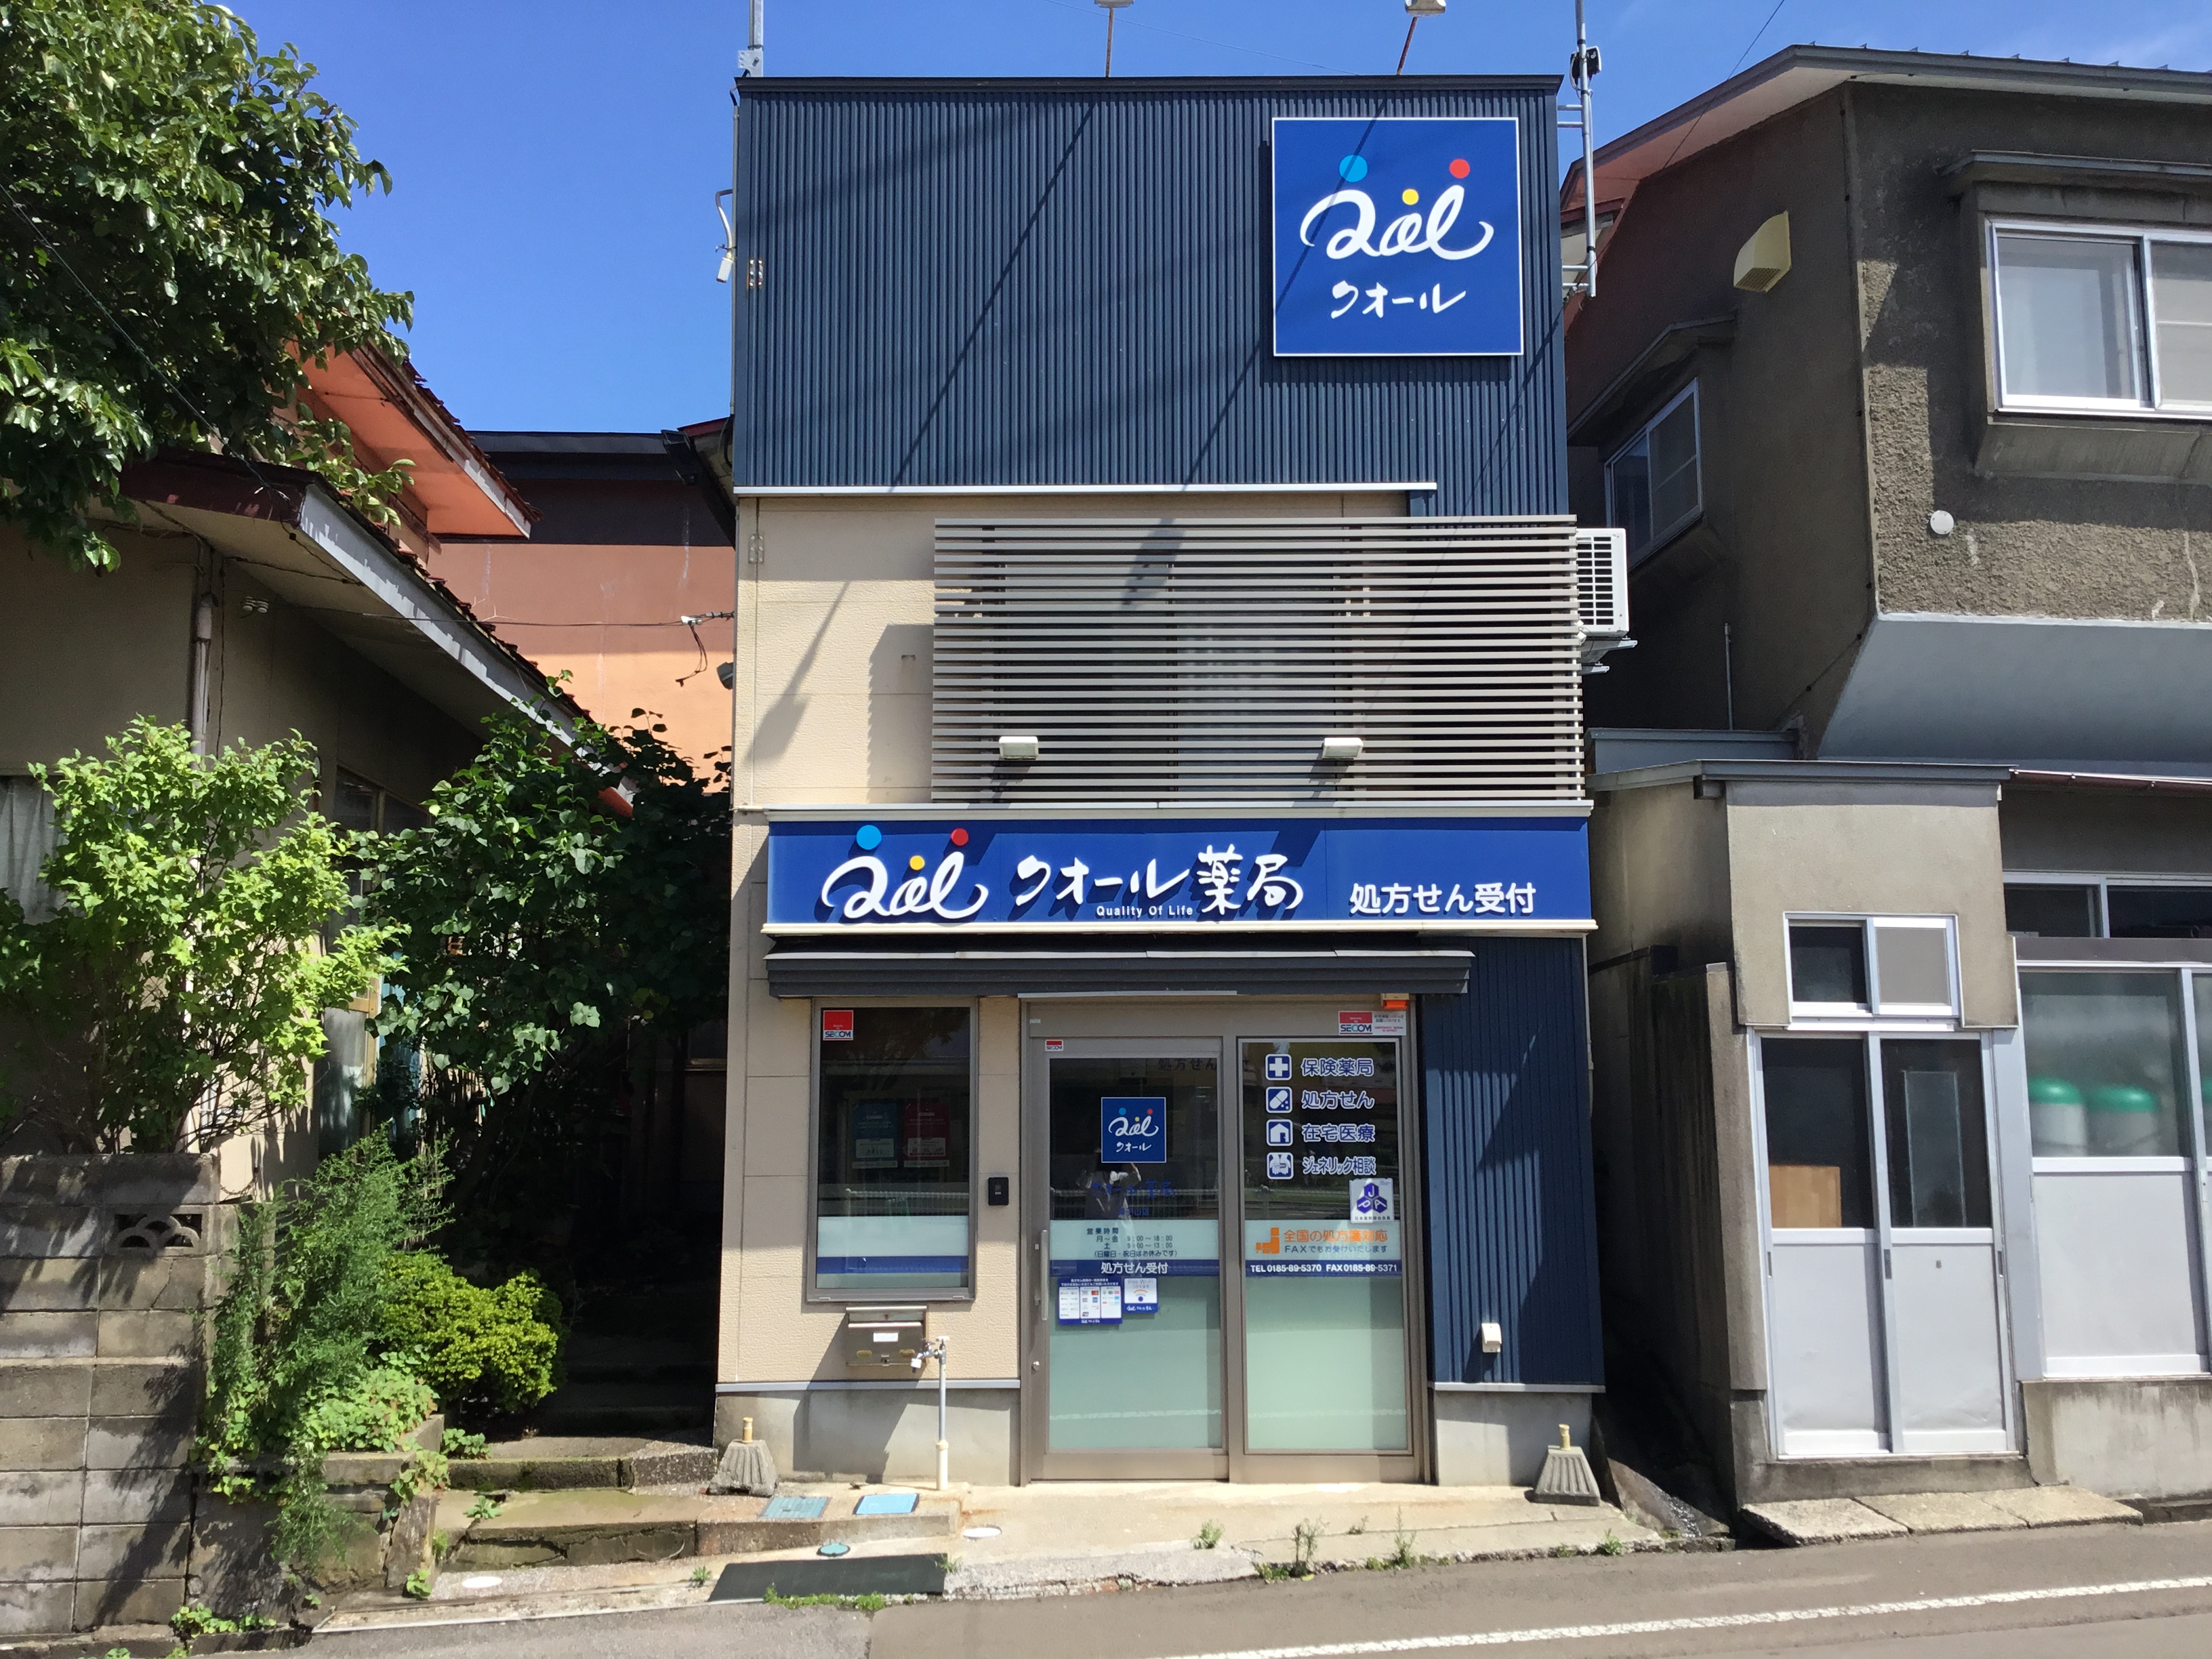 Images クオール薬局樽子山店